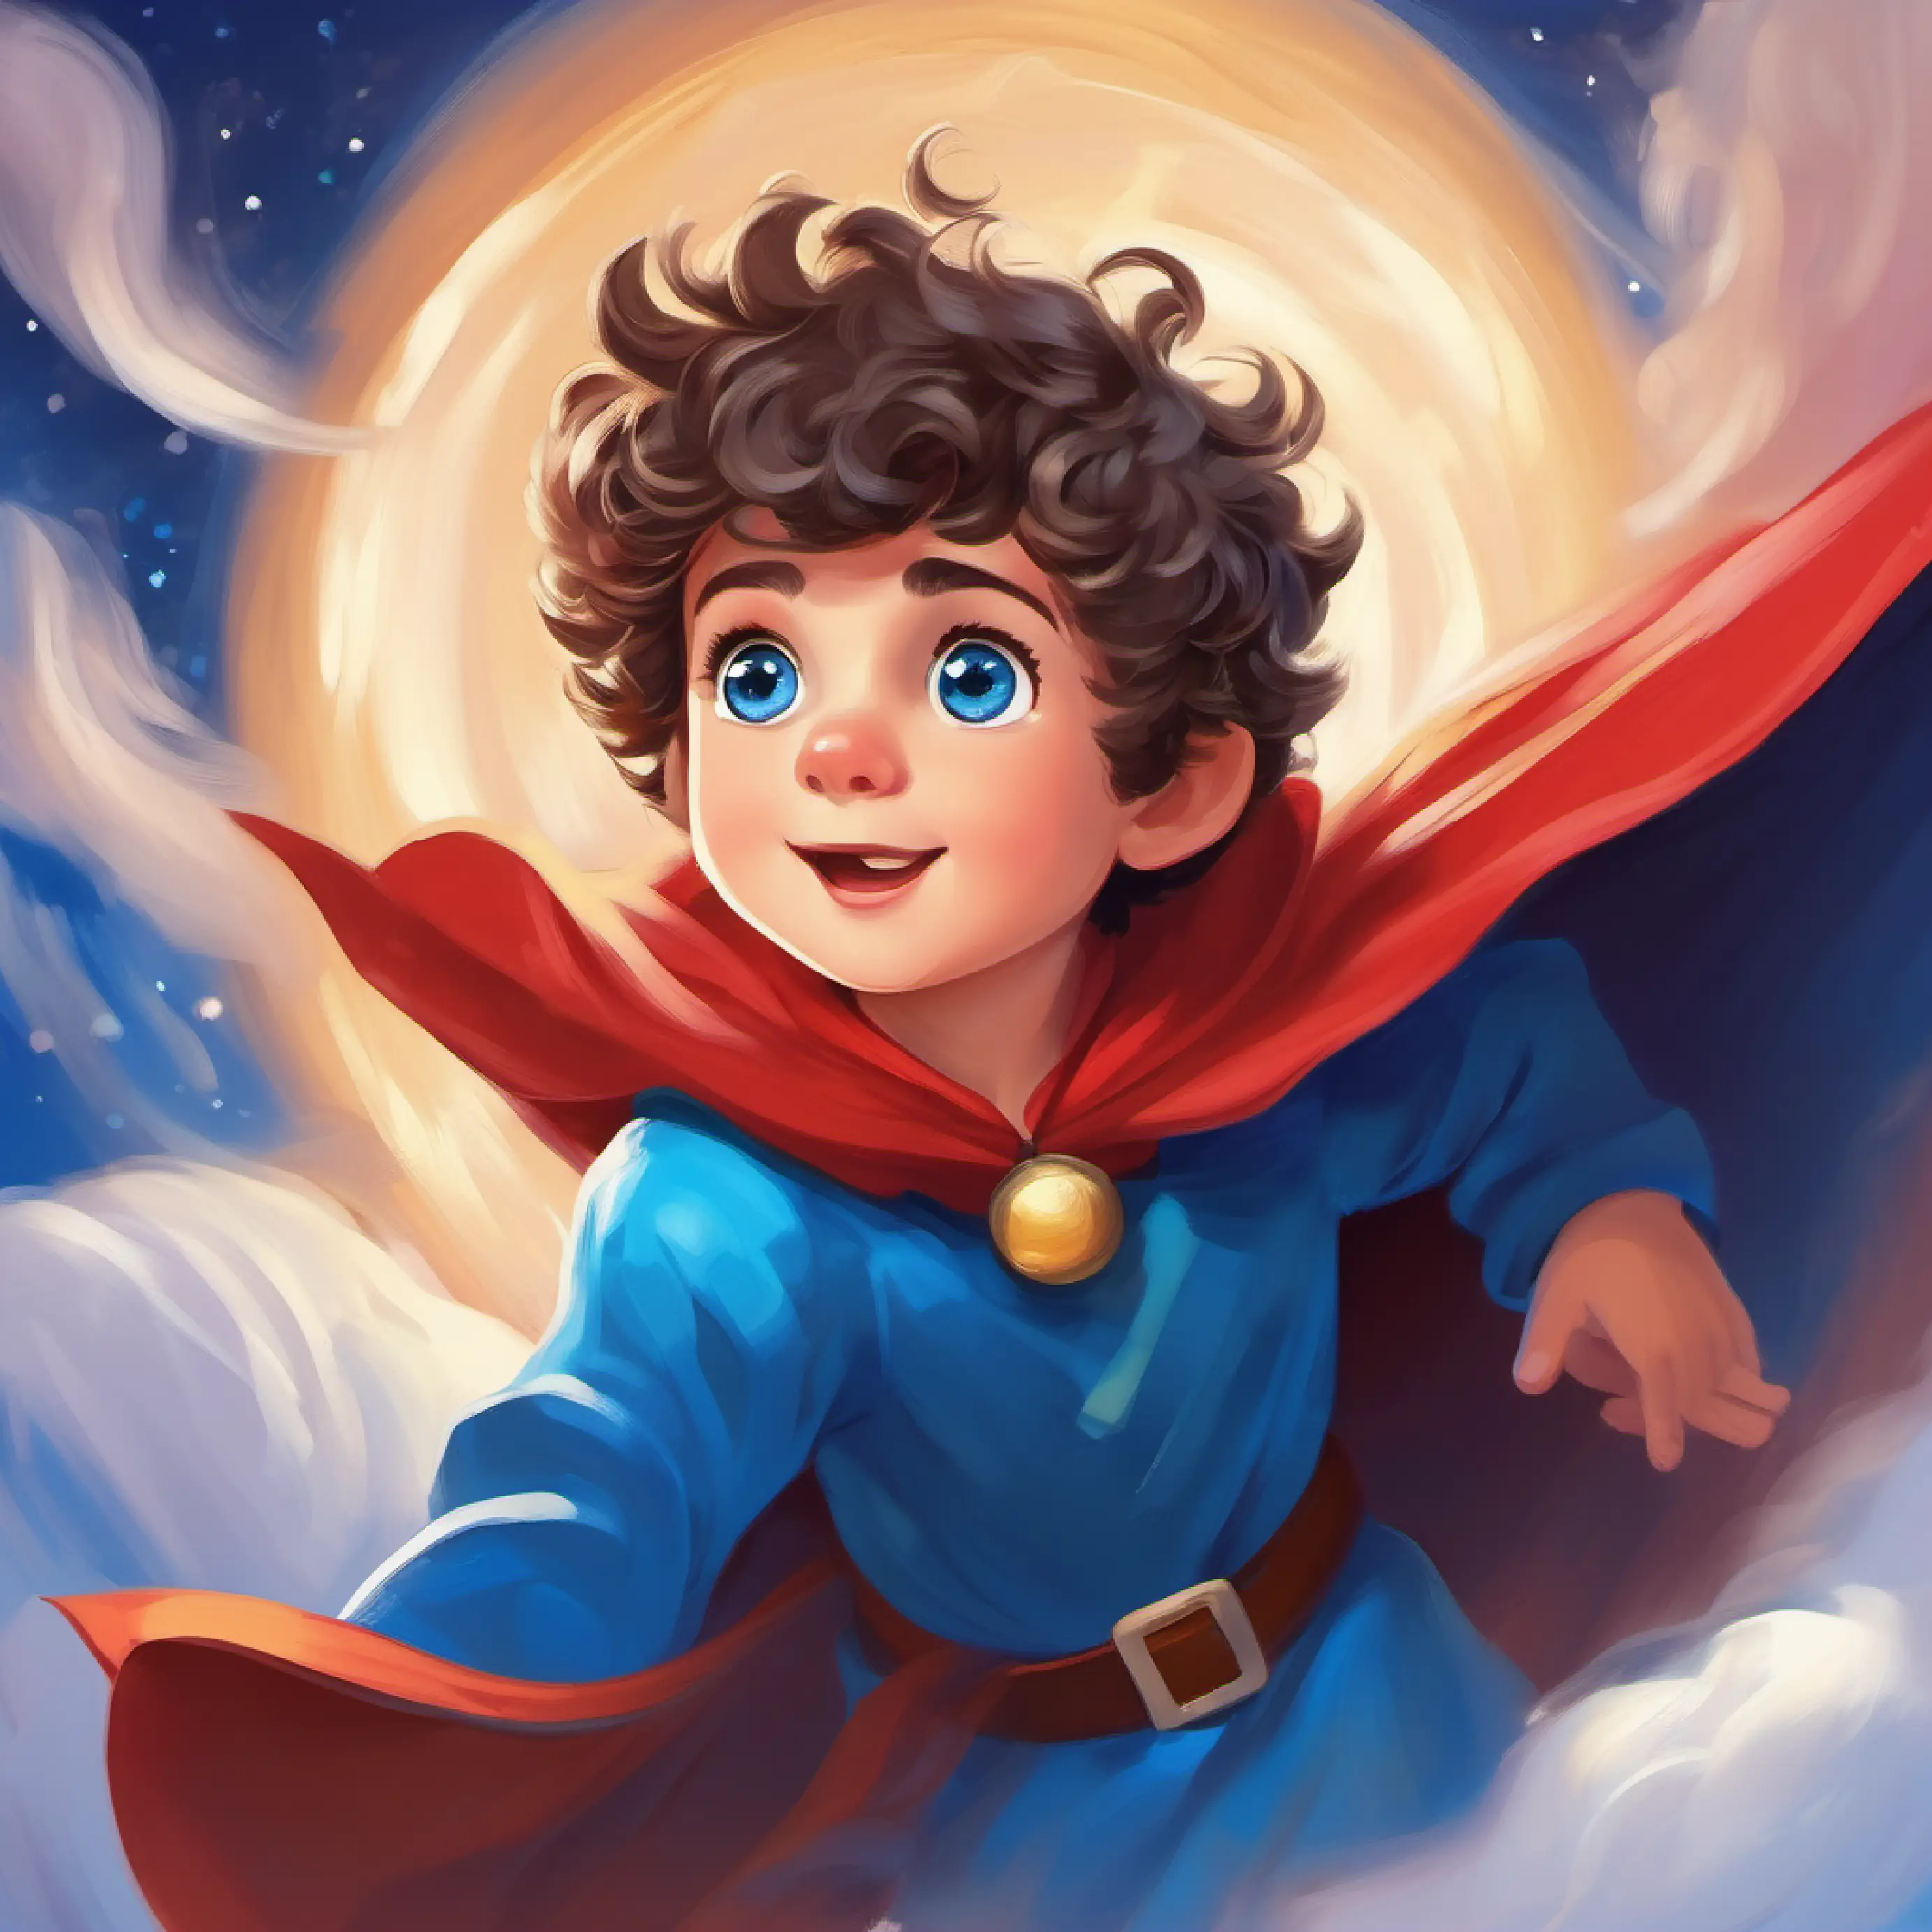 Short, curly hair, bright blue eyes, wearing a cape taking flight within his imagination